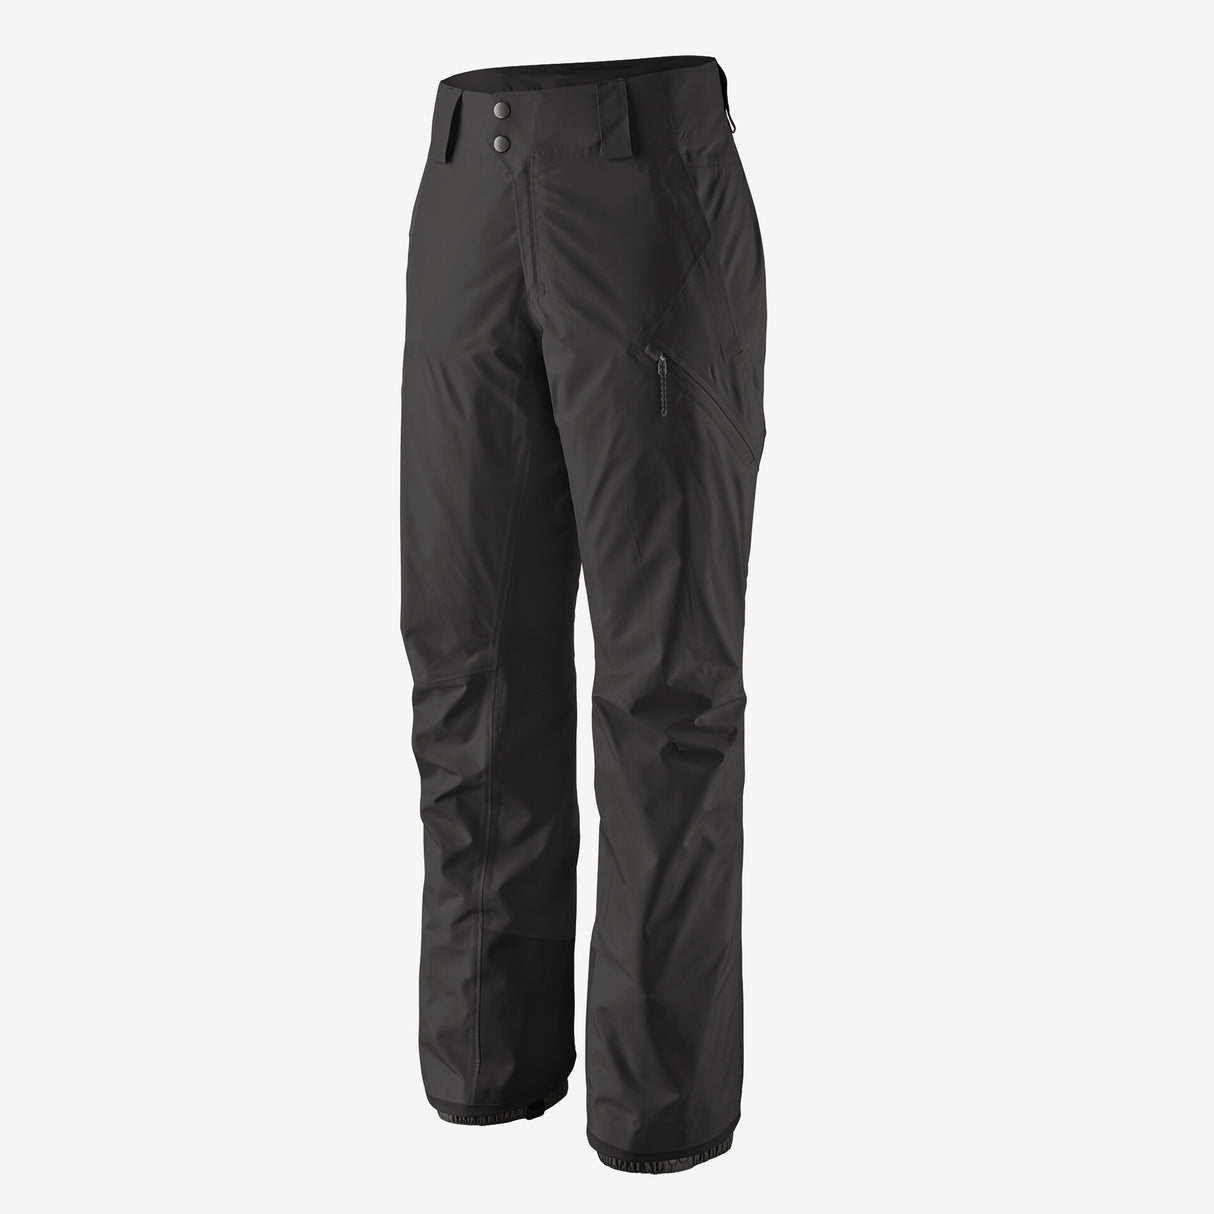 Powder Town Insulated W's Pant 23/24